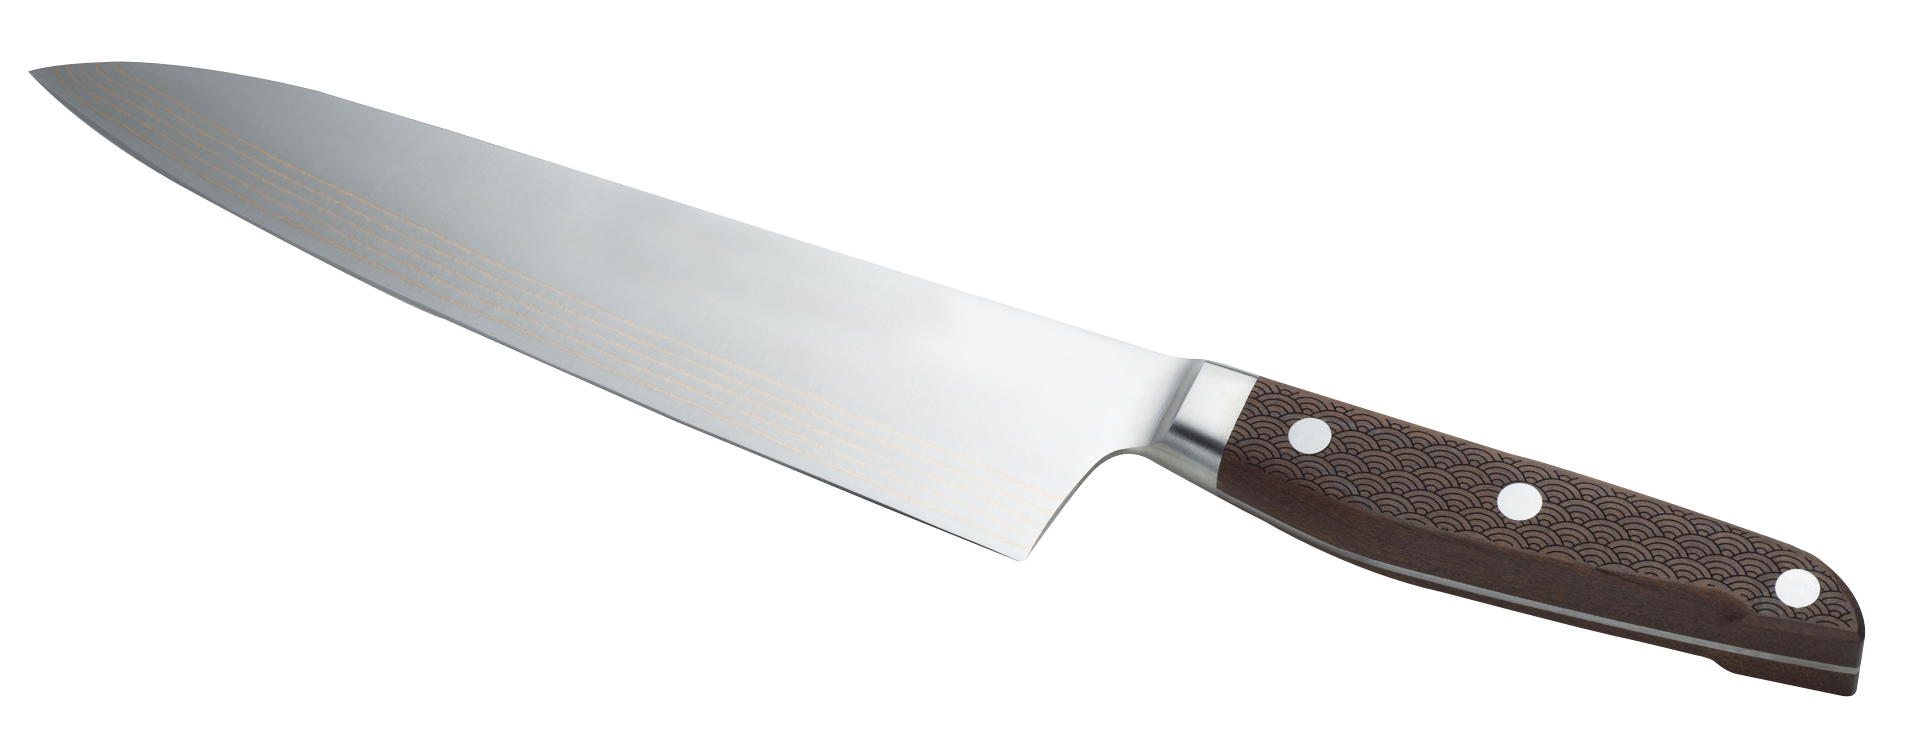 Knife PNG Free Download